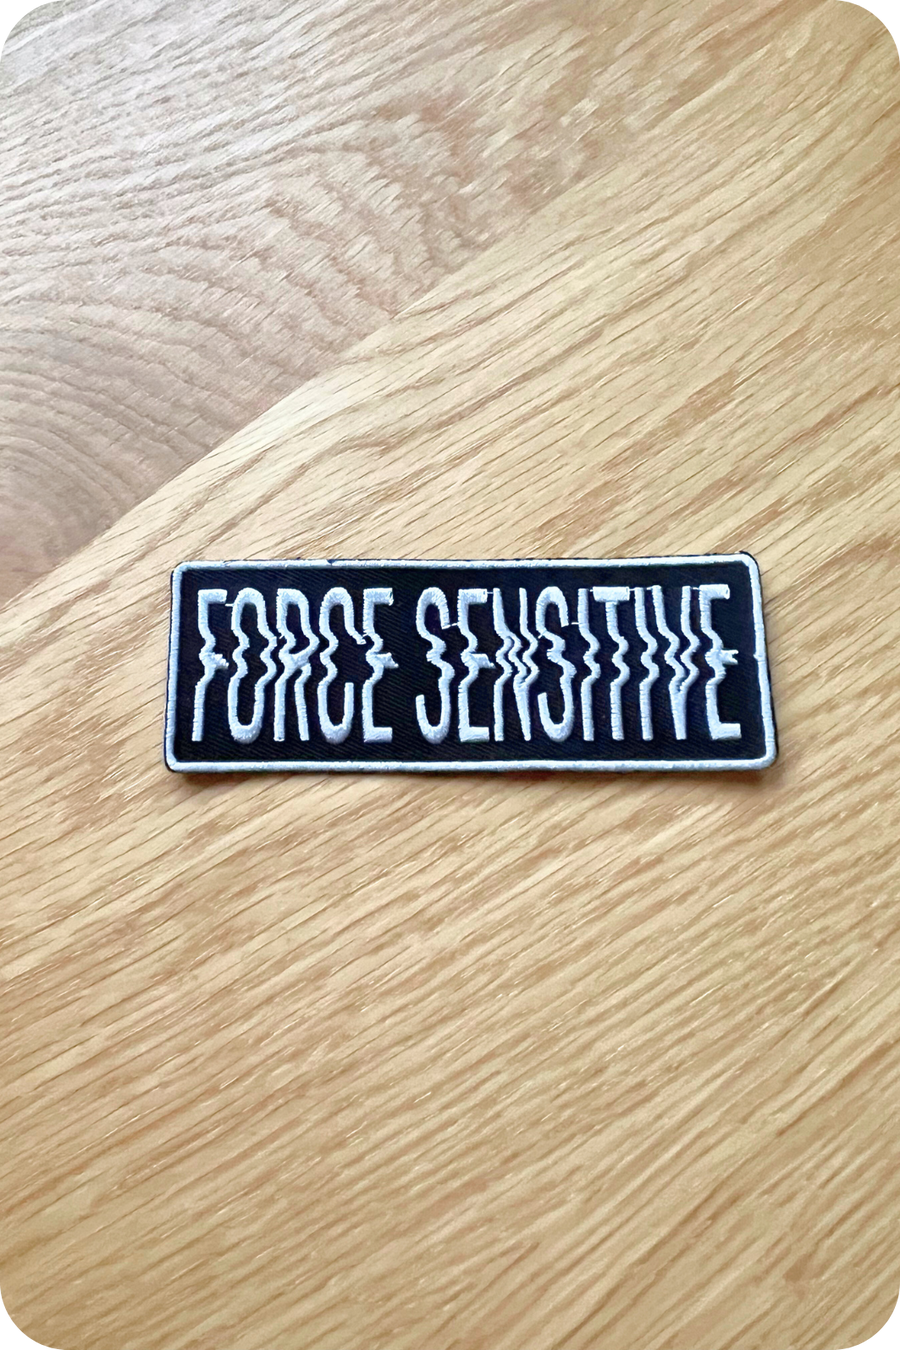 SENSITIVE Embroidered Patch